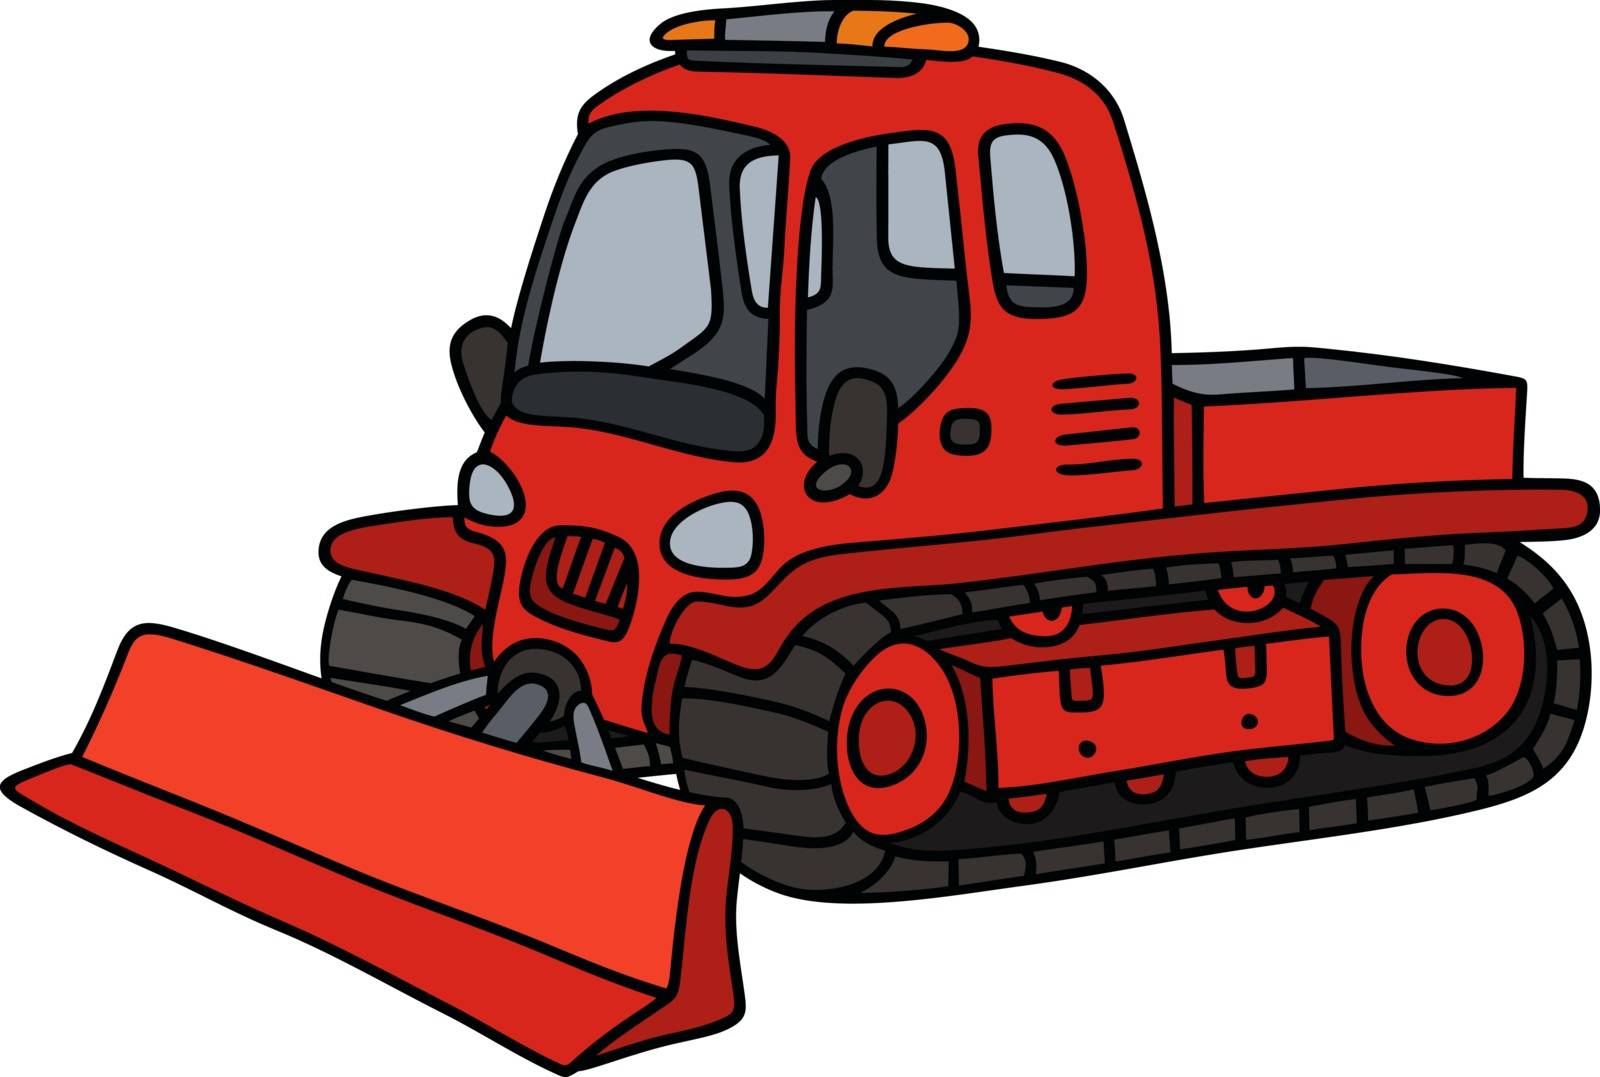 Hand drawing of a funny red tracked snowplow